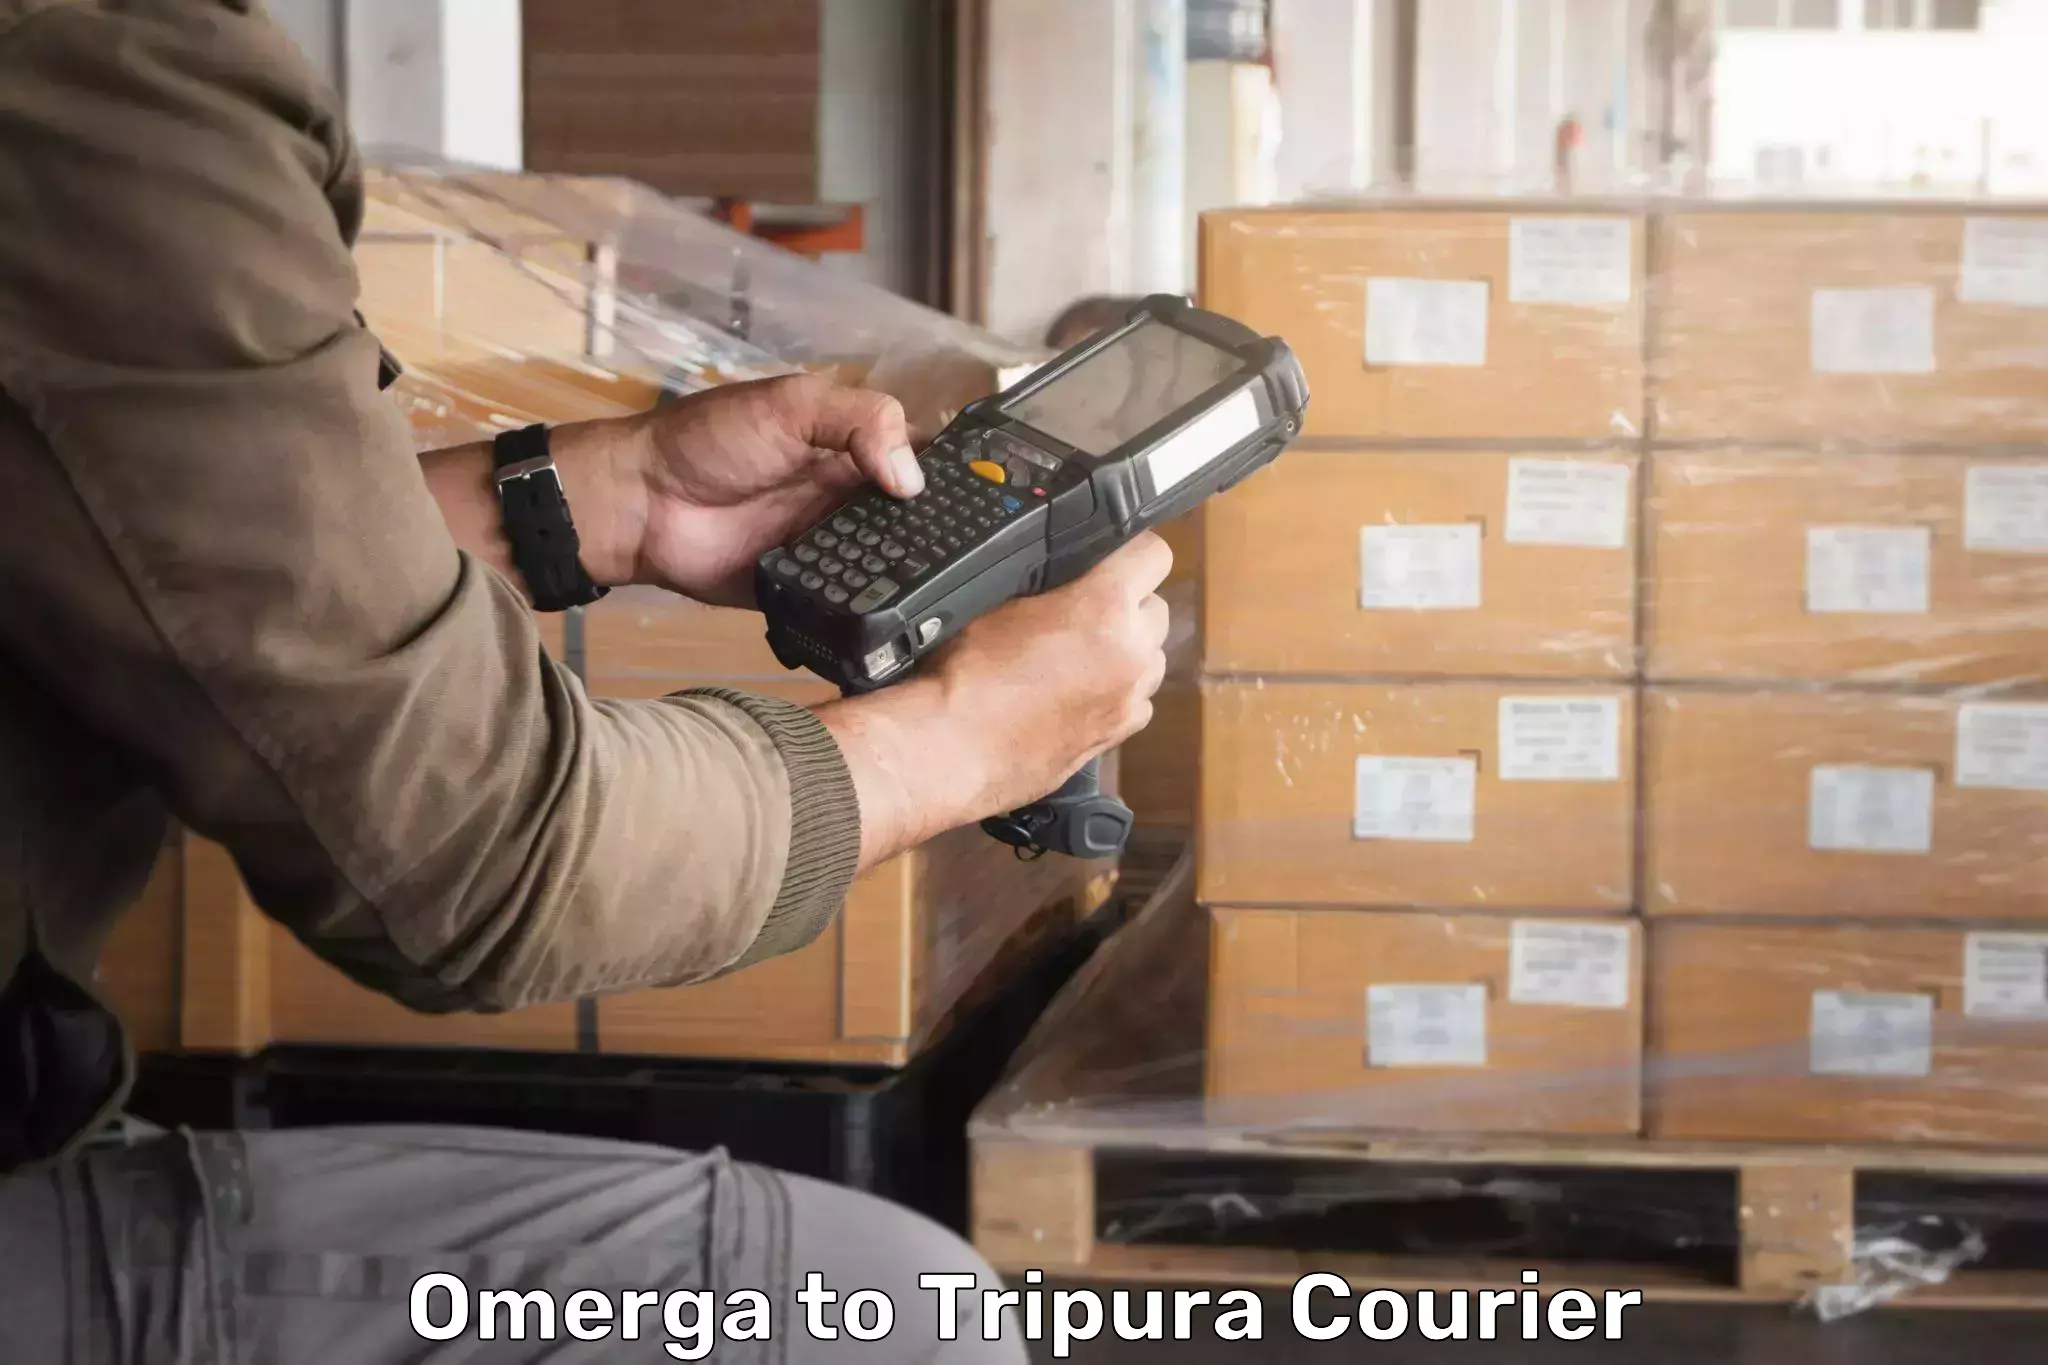 Courier service comparison Omerga to Aambasa